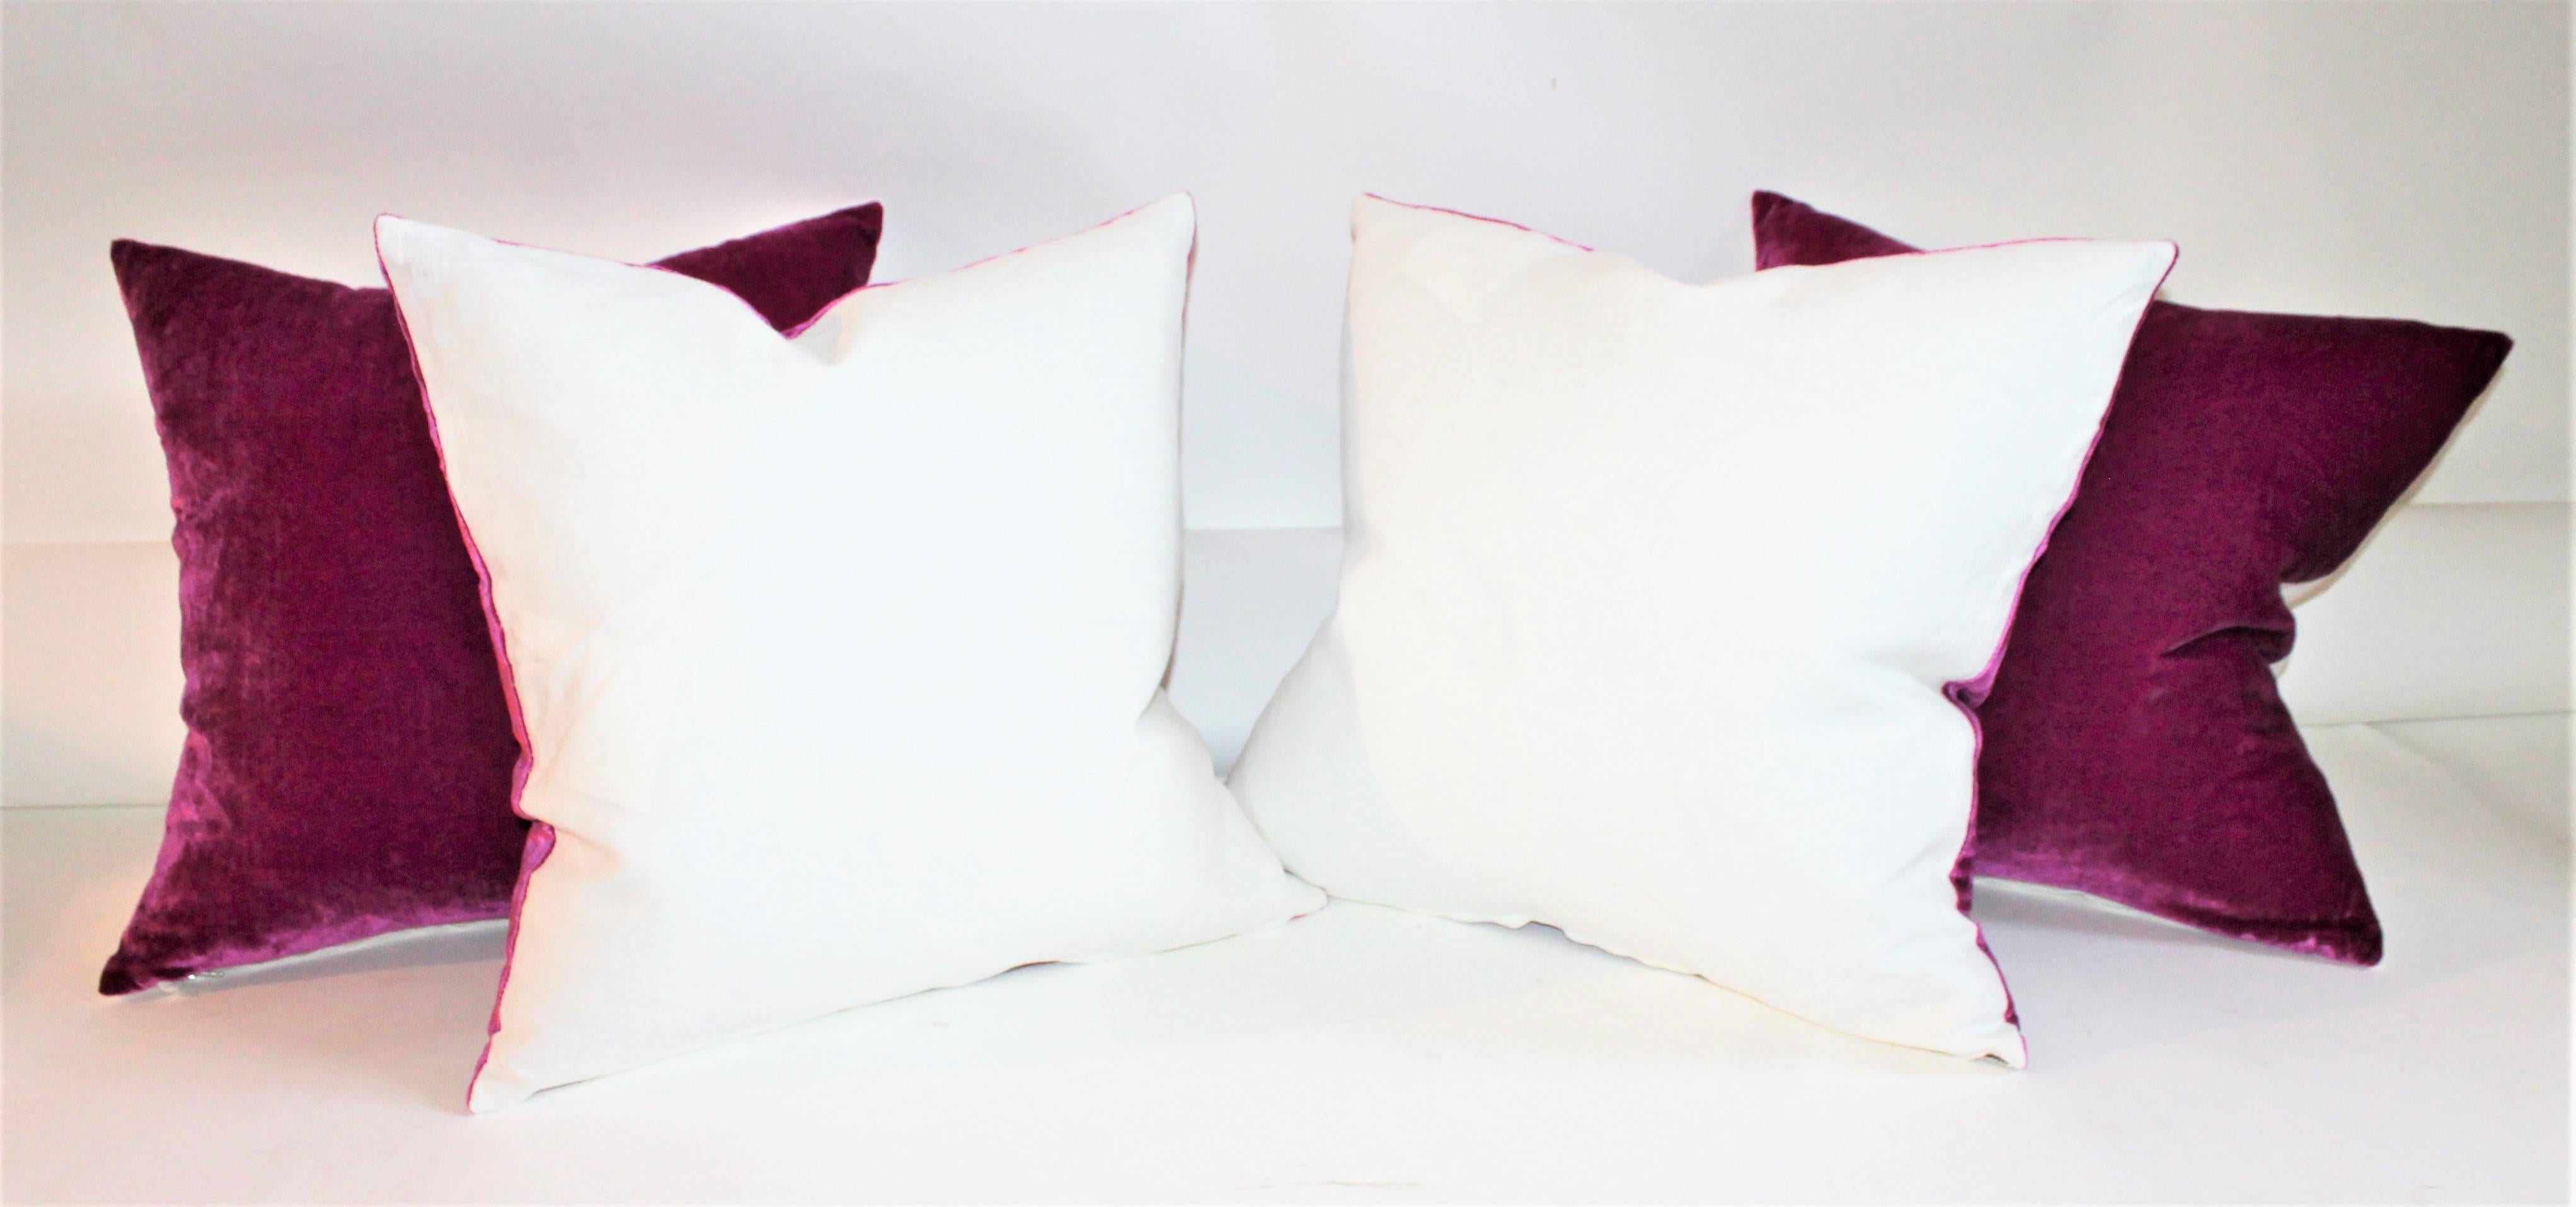 Hand-Crafted Pink Velvet Pillows / Collection of Four